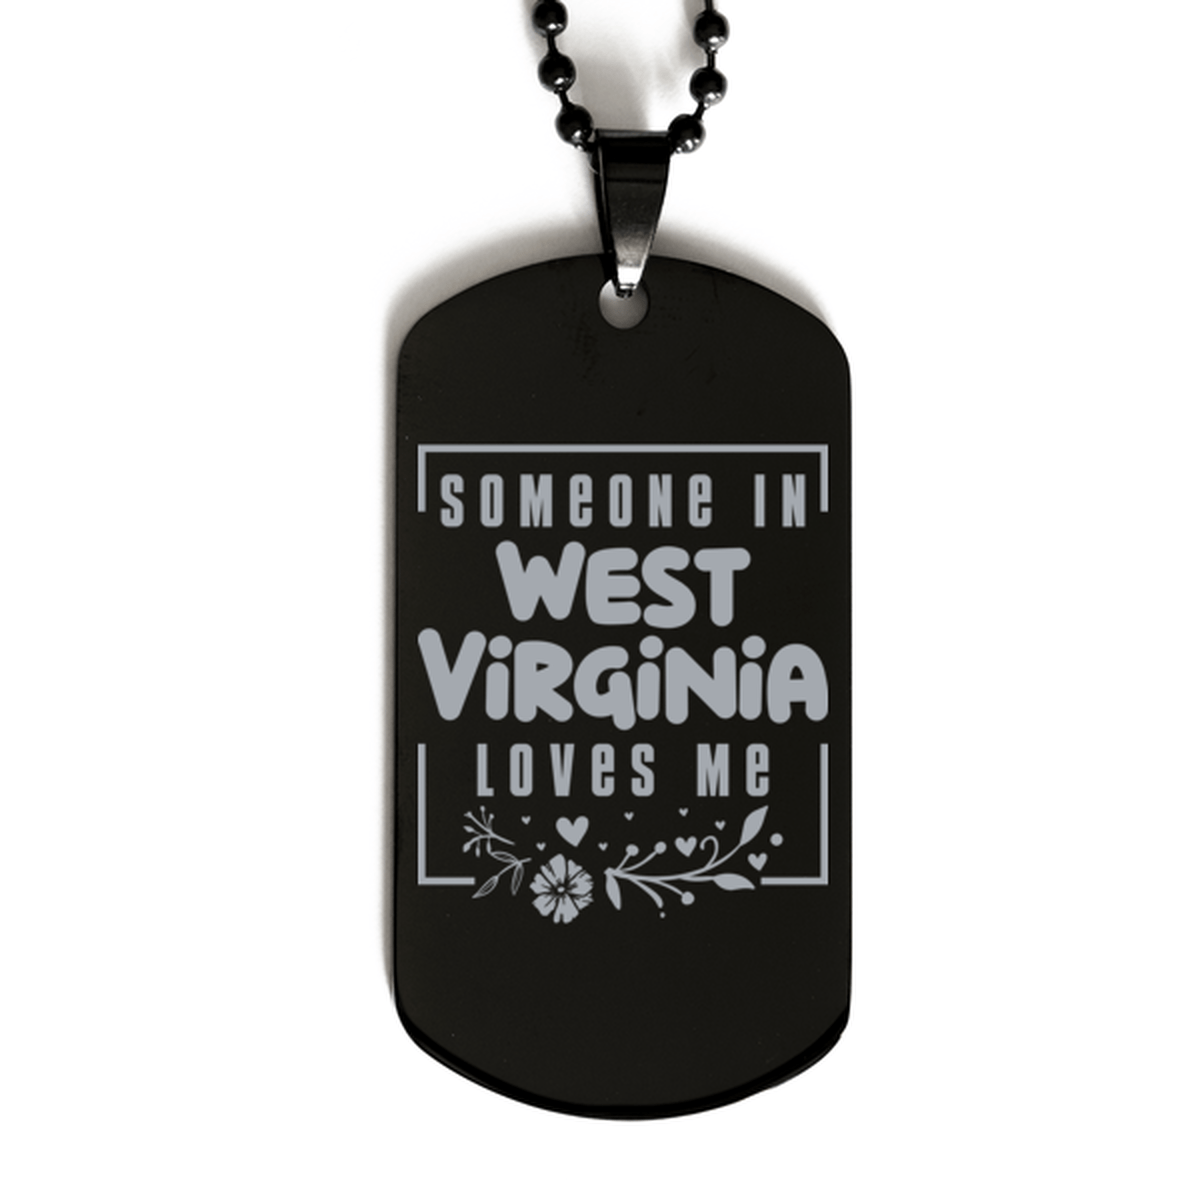 Cute West Virginia Black Dog Tag Necklace, Someone in West Virginia Loves Me, Best Birthday Gifts from West Virginia Friends & Family